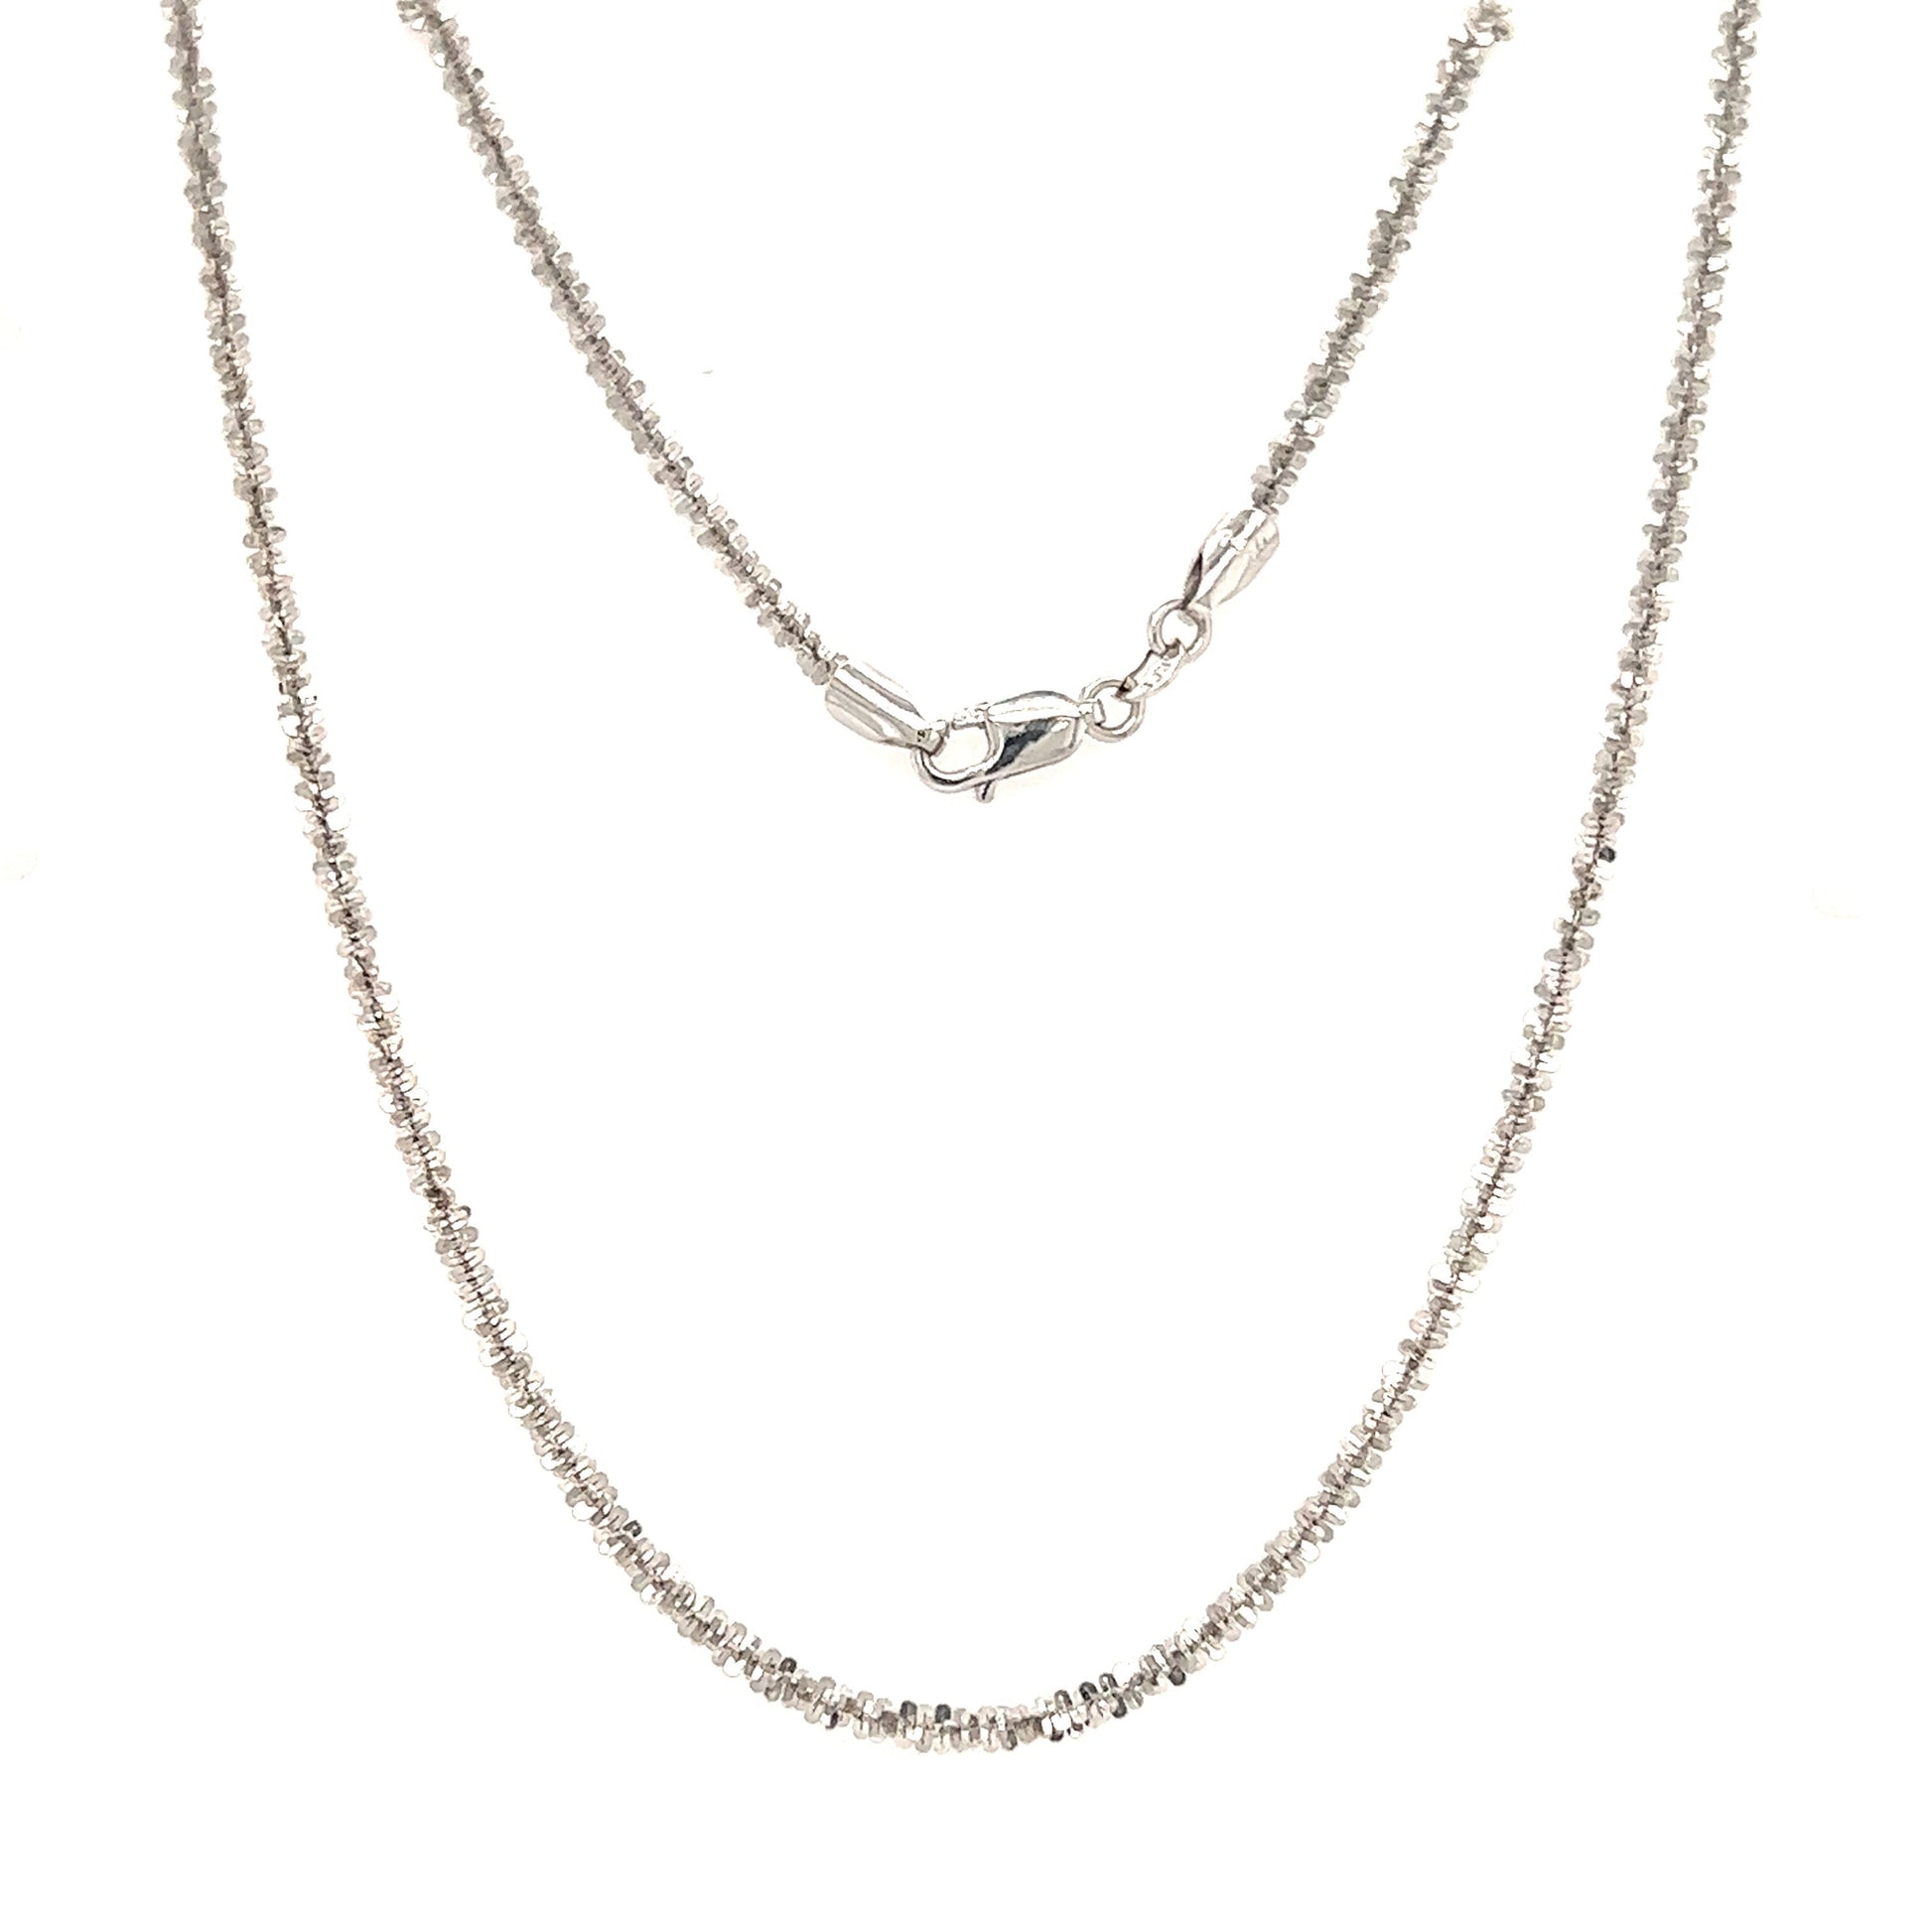 Sparkle Chain 2.0mm with 18in Length in 14K White Gold Full Chain View